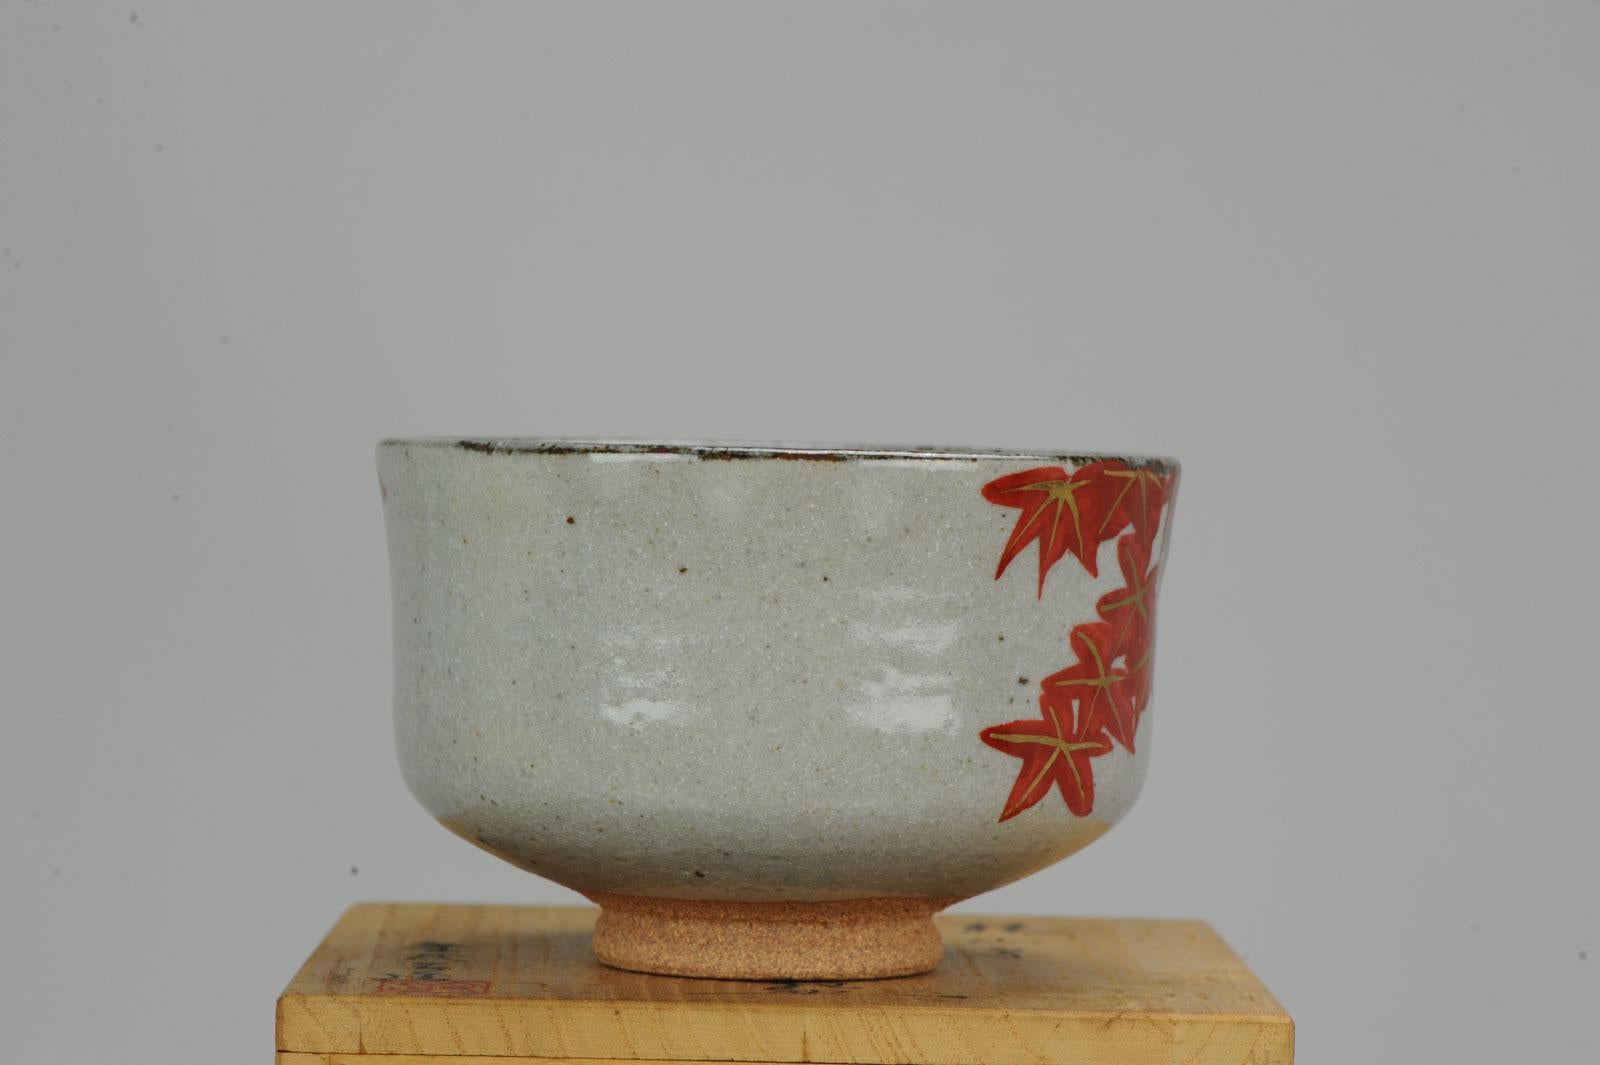 Japanese Taisho Period Tea Bowl in Tomobako Earthenware Japan Tea

The box is included.

Additional information:
Material: Porcelain & Pottery
Type: Bowls
Region of Origin: Japan
Period: 20th century
Age: Pre-1800
Condition: Perfect
Dimension: Ø 12